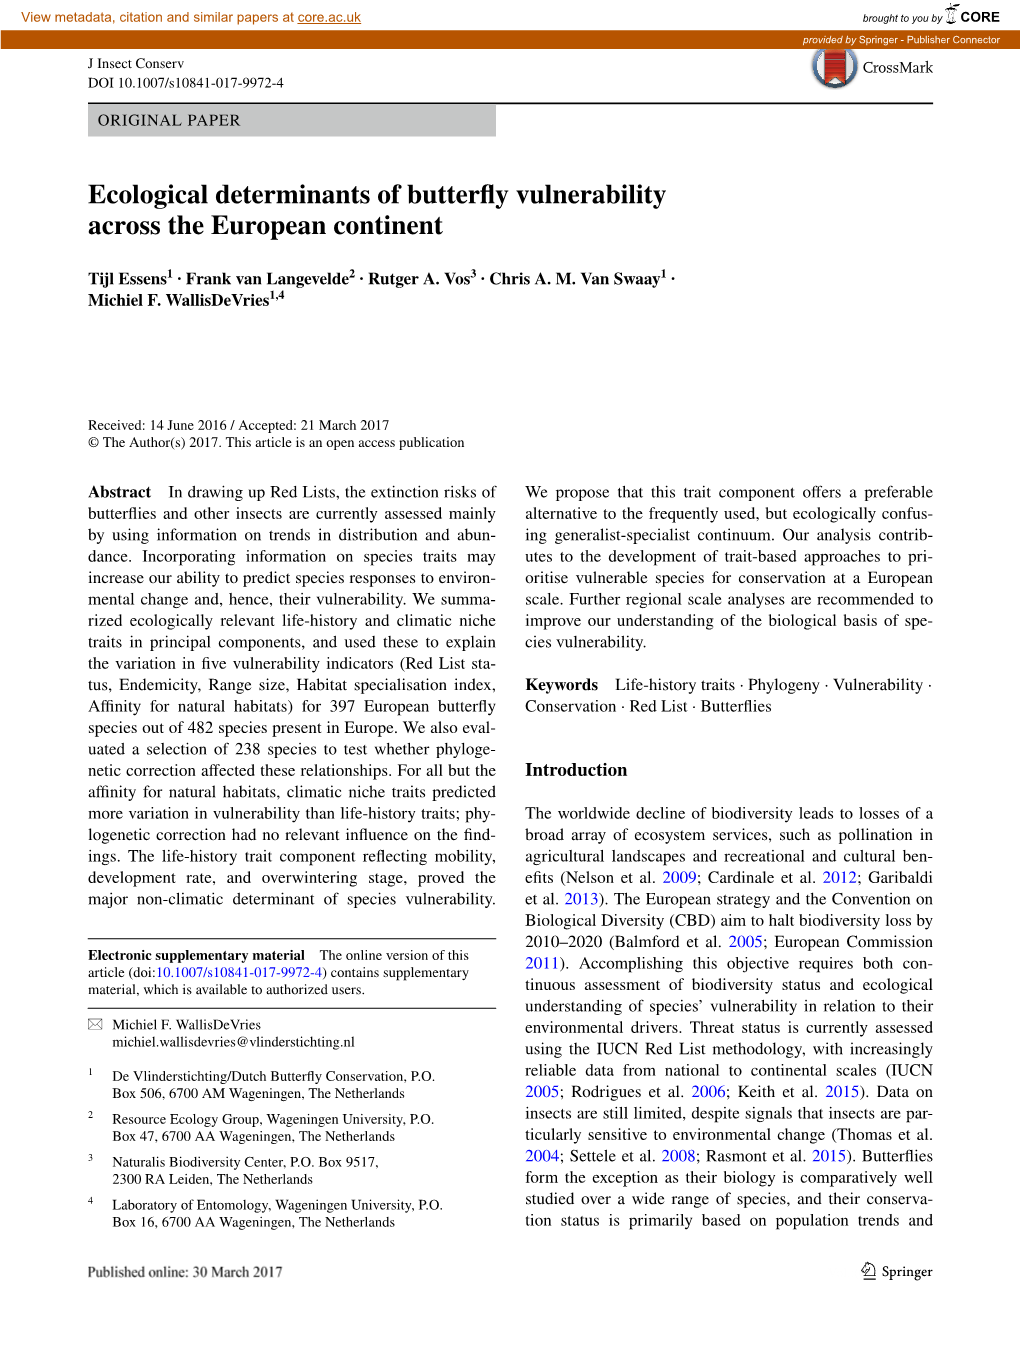 Ecological Determinants of Butterfly Vulnerability Across the European Continent